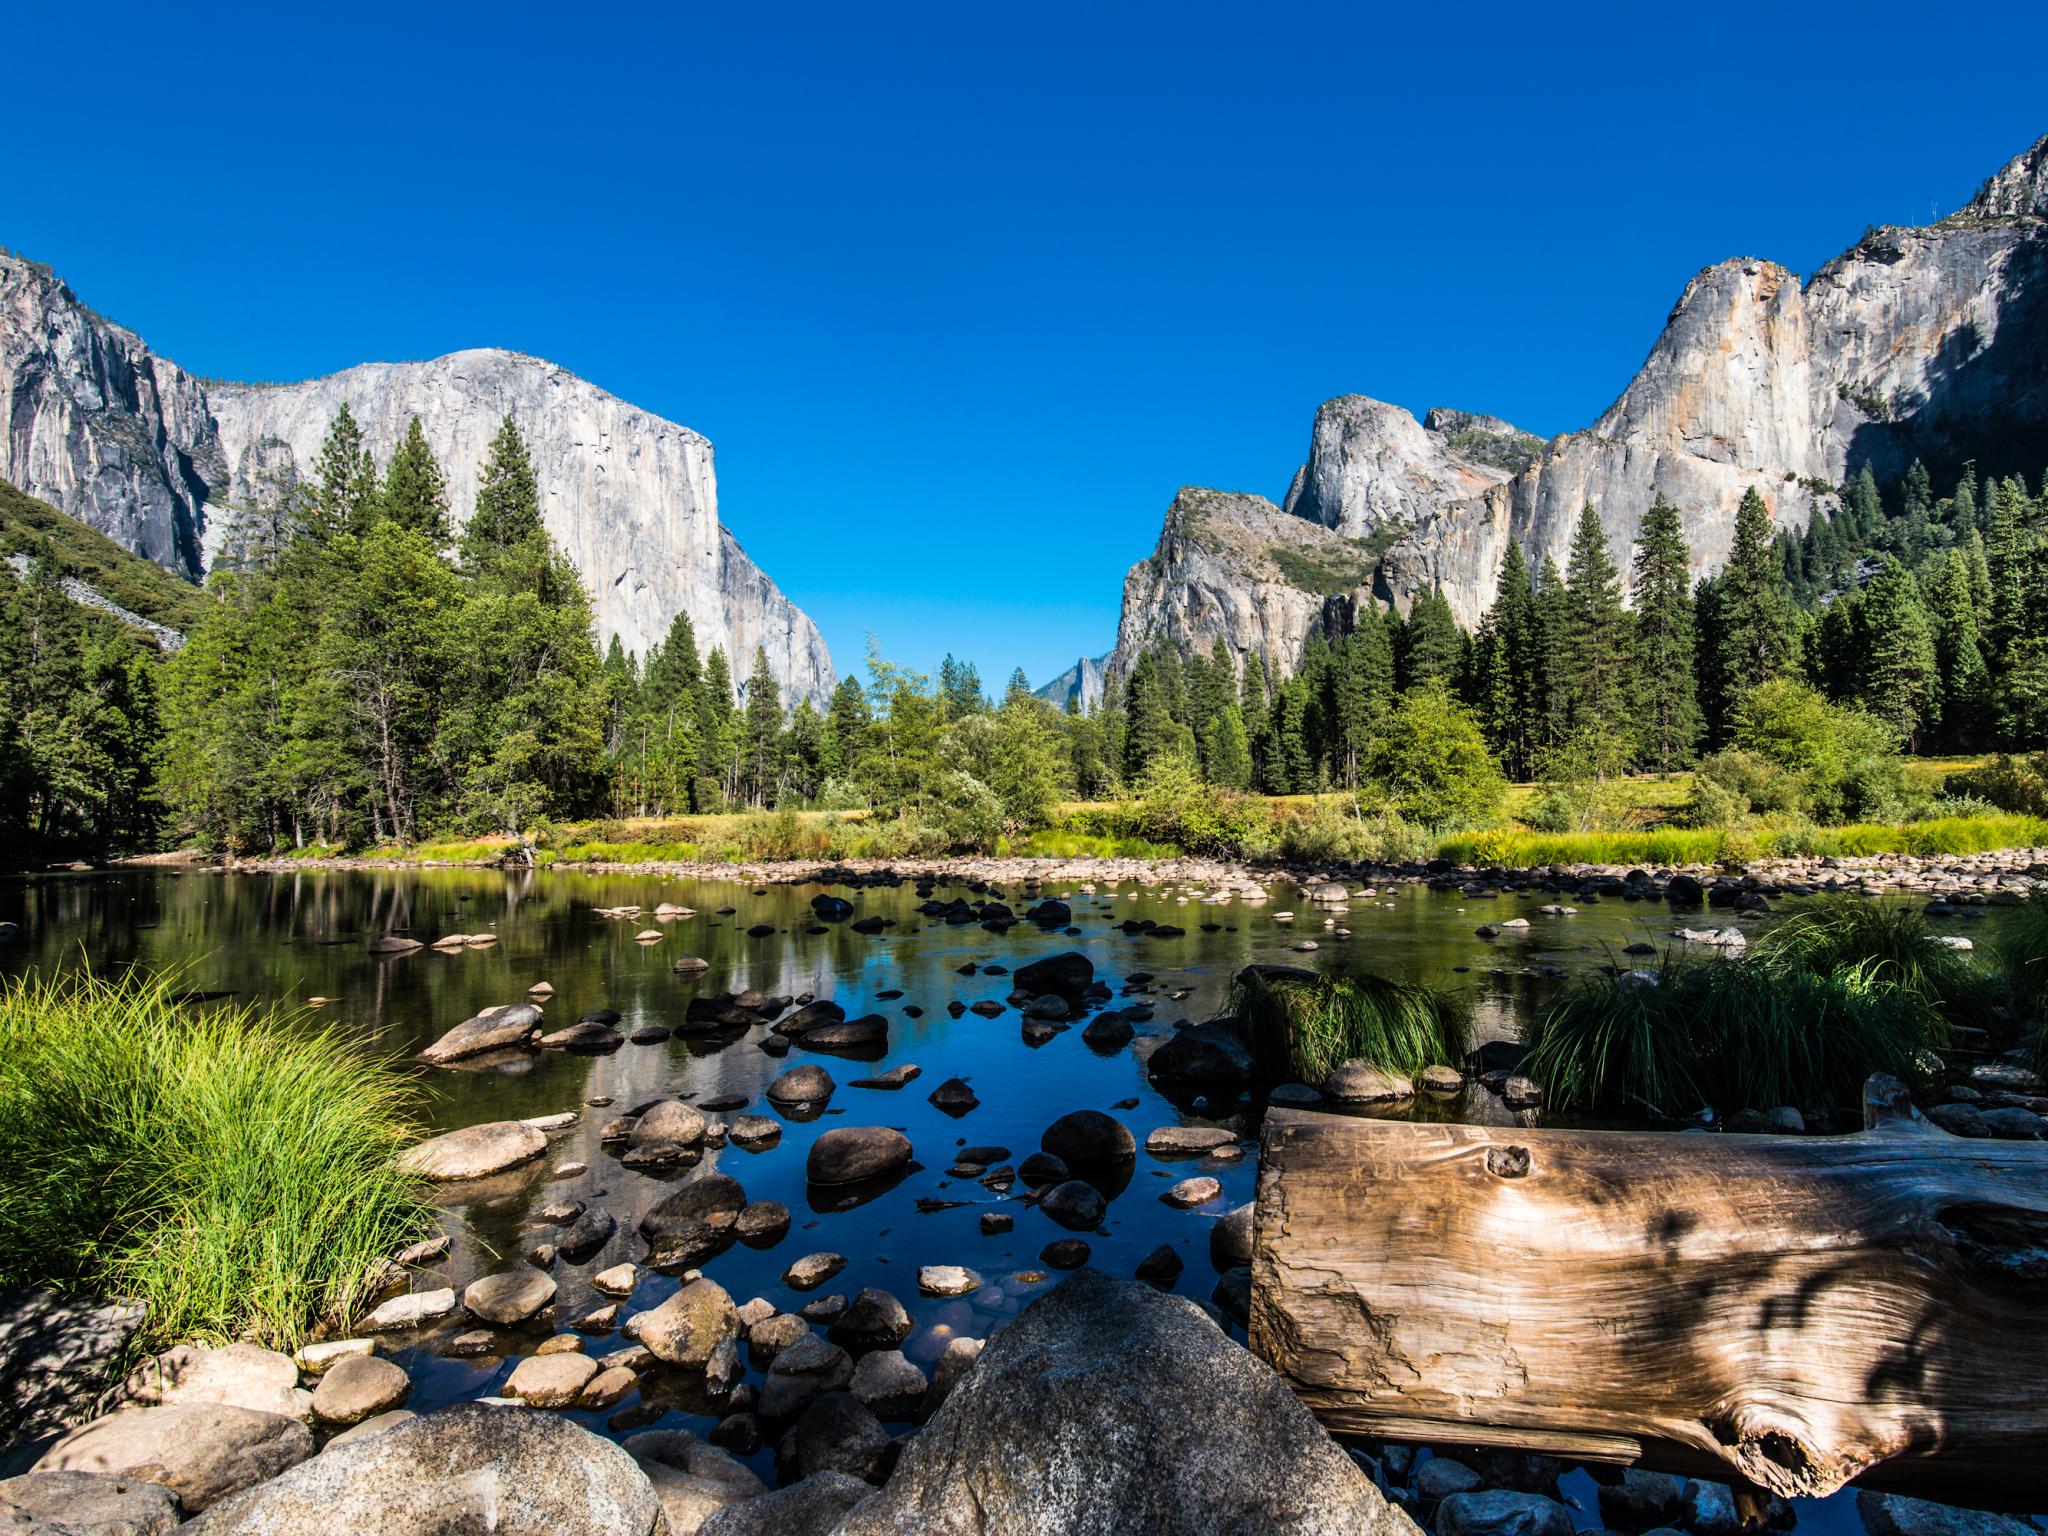 11 Awesome Stops on a Las Vegas to Yosemite Road Trip (+ a Winter